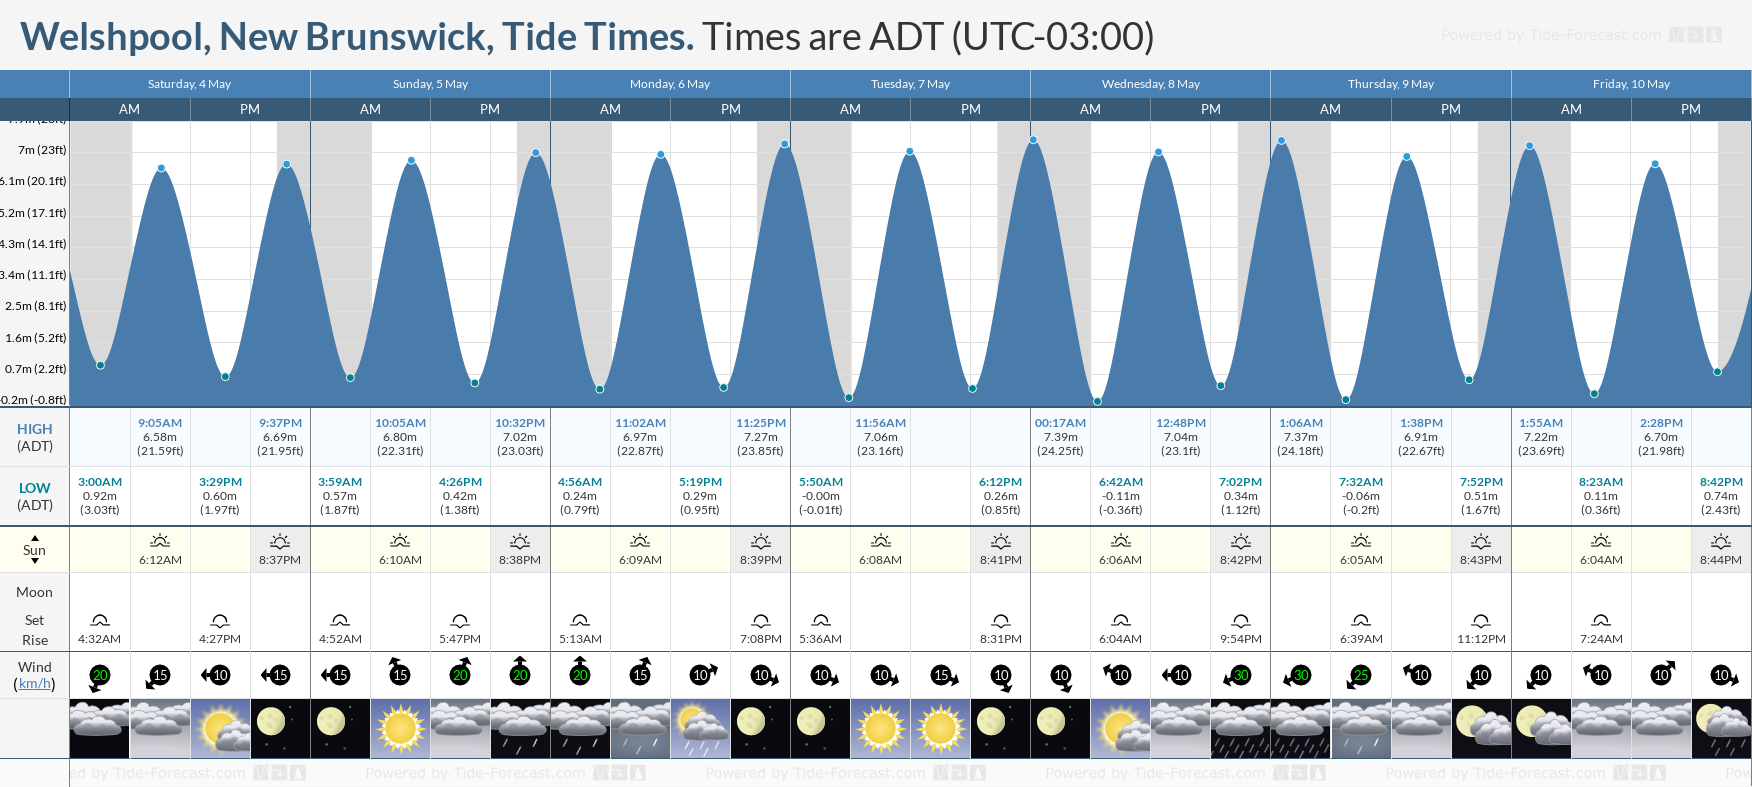 Welshpool, New Brunswick Tide Chart including high and low tide times for the next 7 days